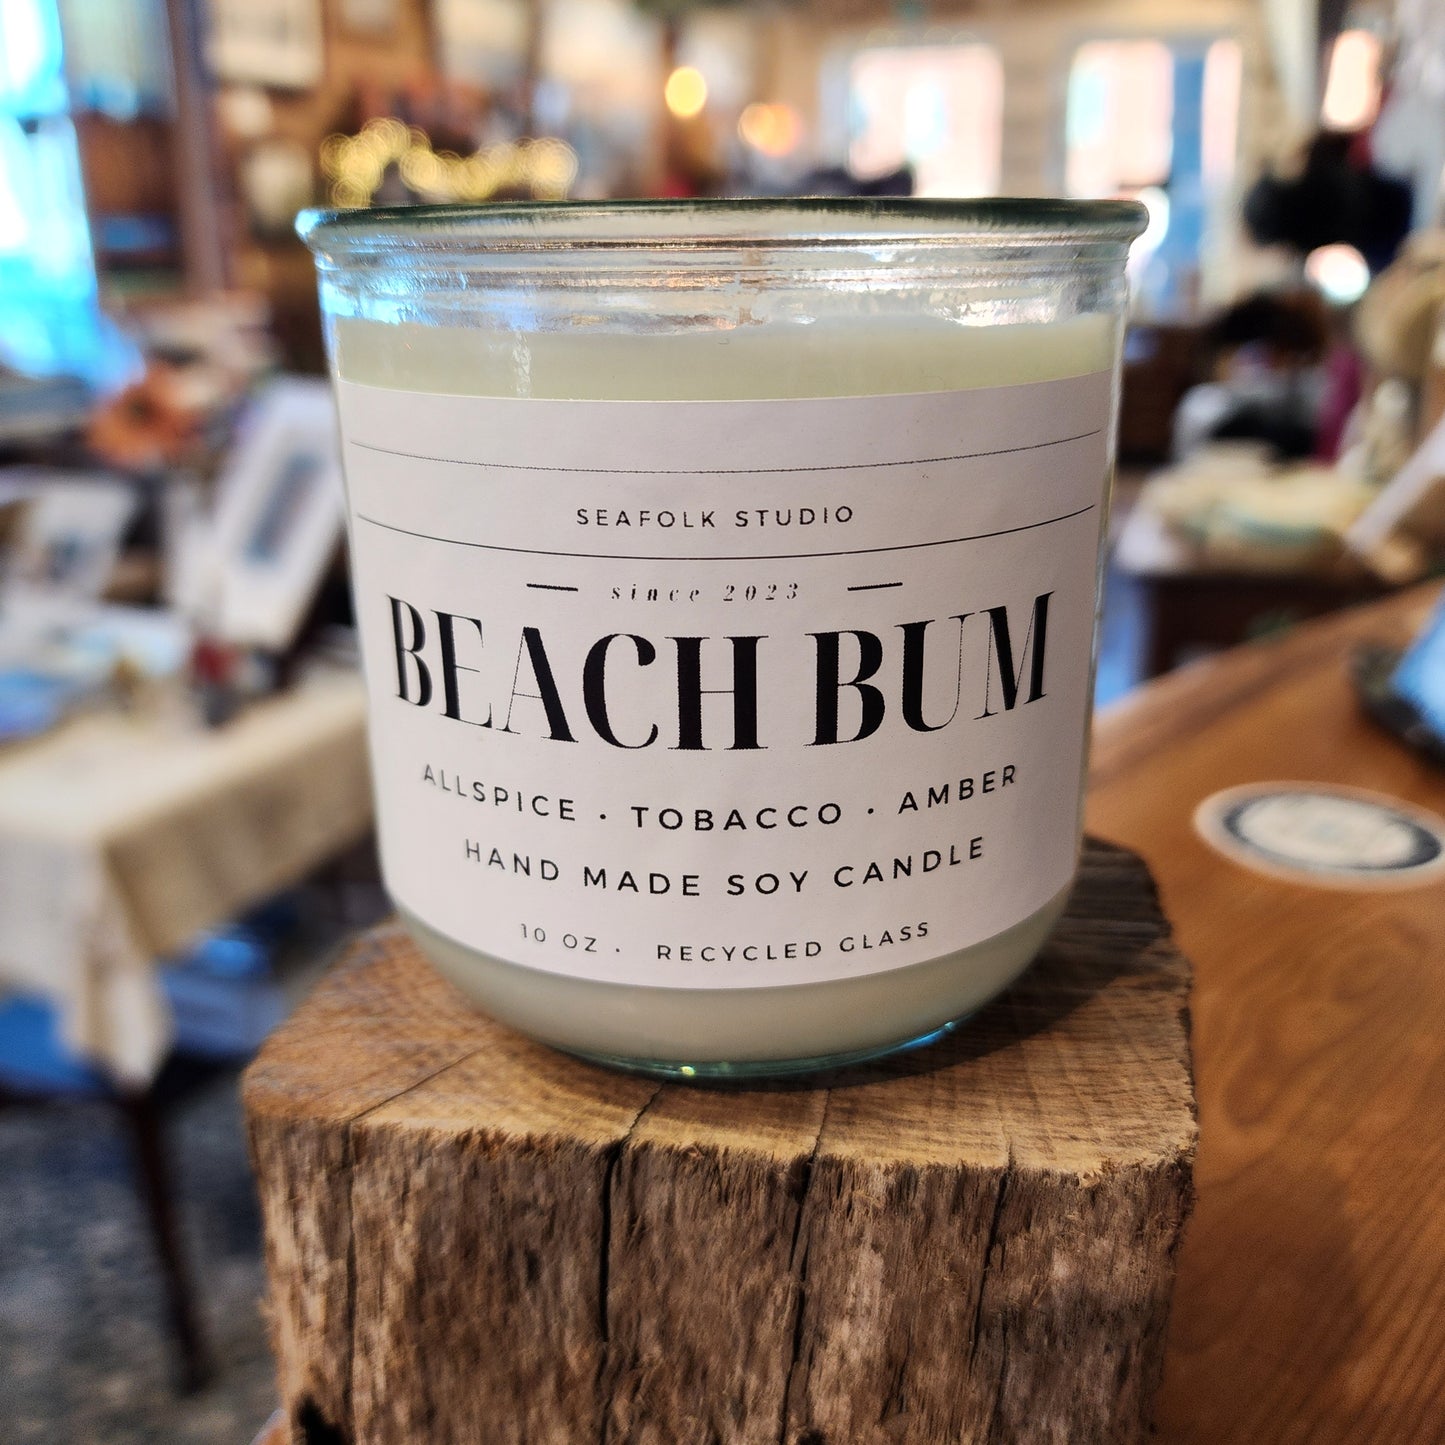 "Beach Bum" Candle | 10 oz in Recycled Glass